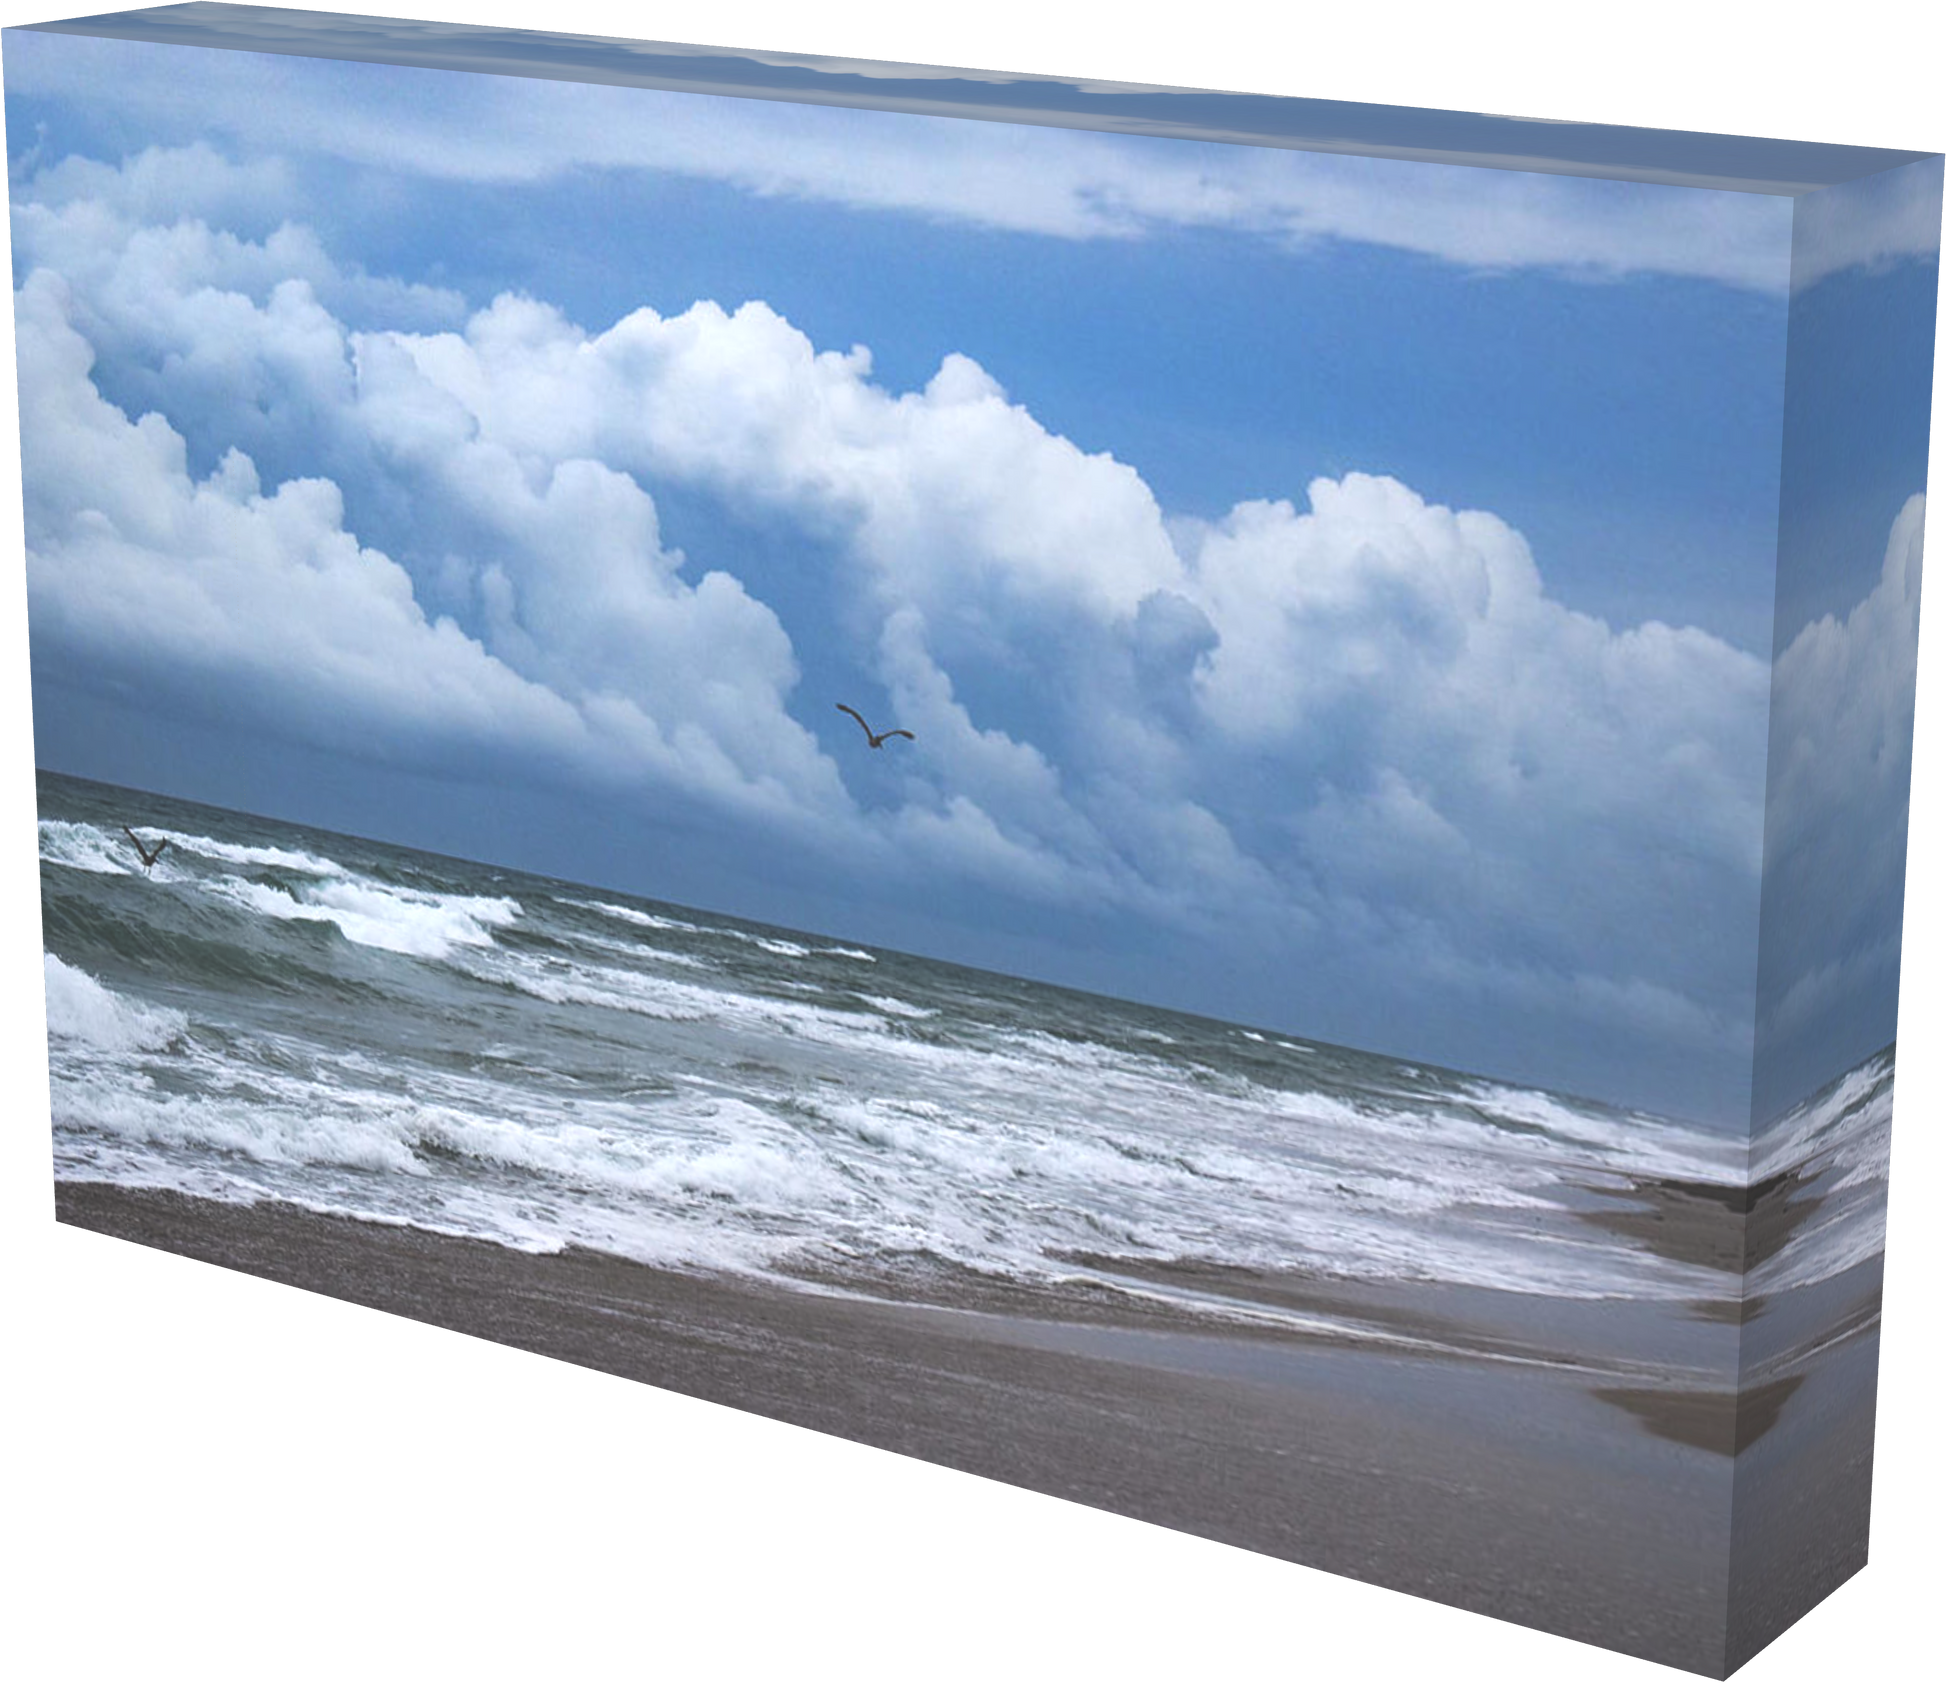 surrounded by clouds & waves - canvas print by Jacqueline mb designs 